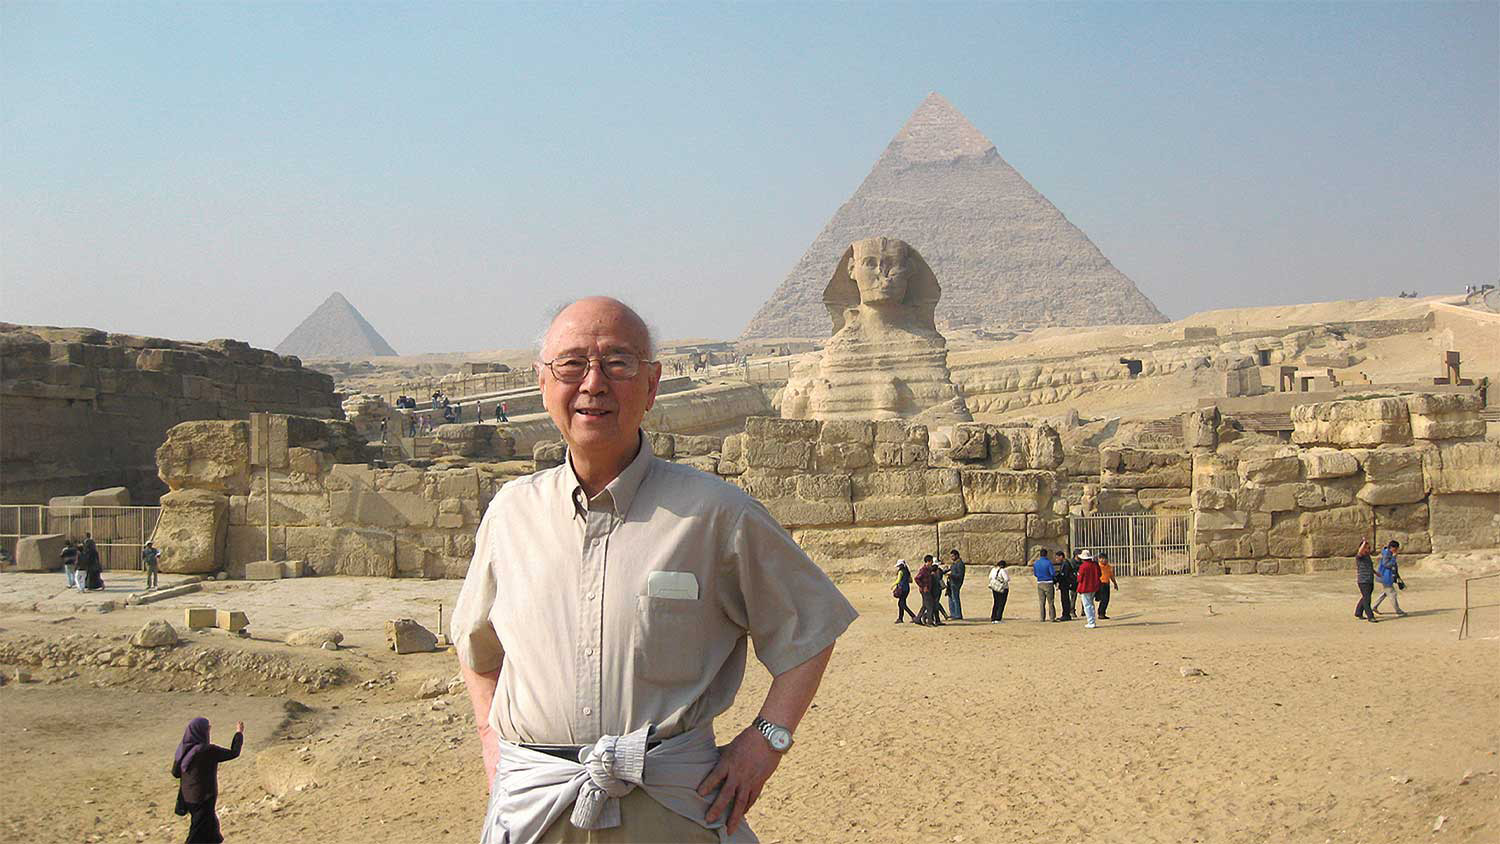 Chia Ven Pao in Egypt in front of the Sphinx and Great Pyramids of Giza